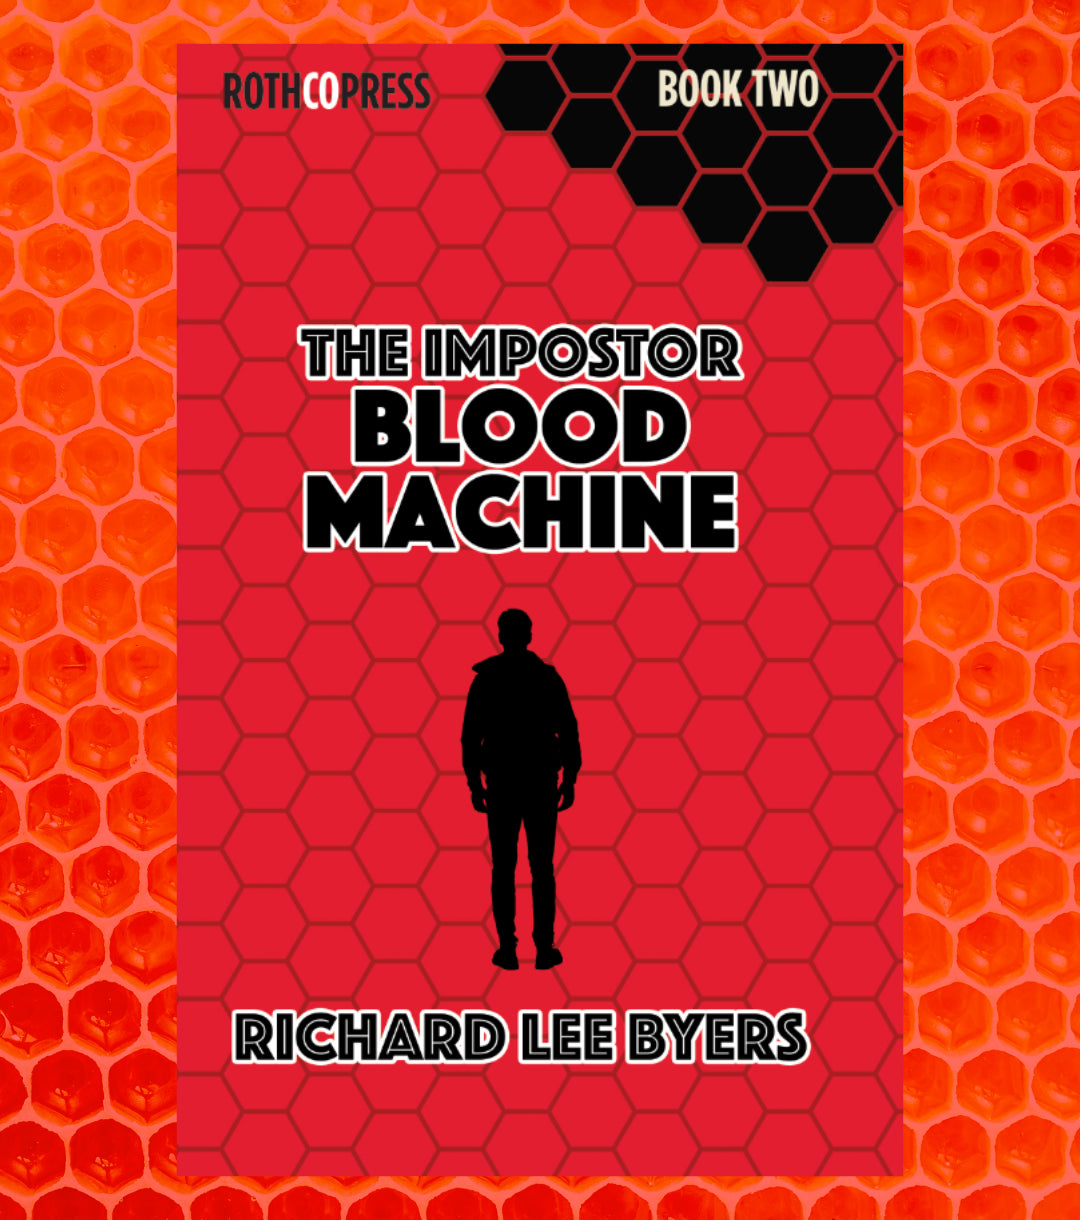 The Imposter: Blood Machine by Richard Lee Byers